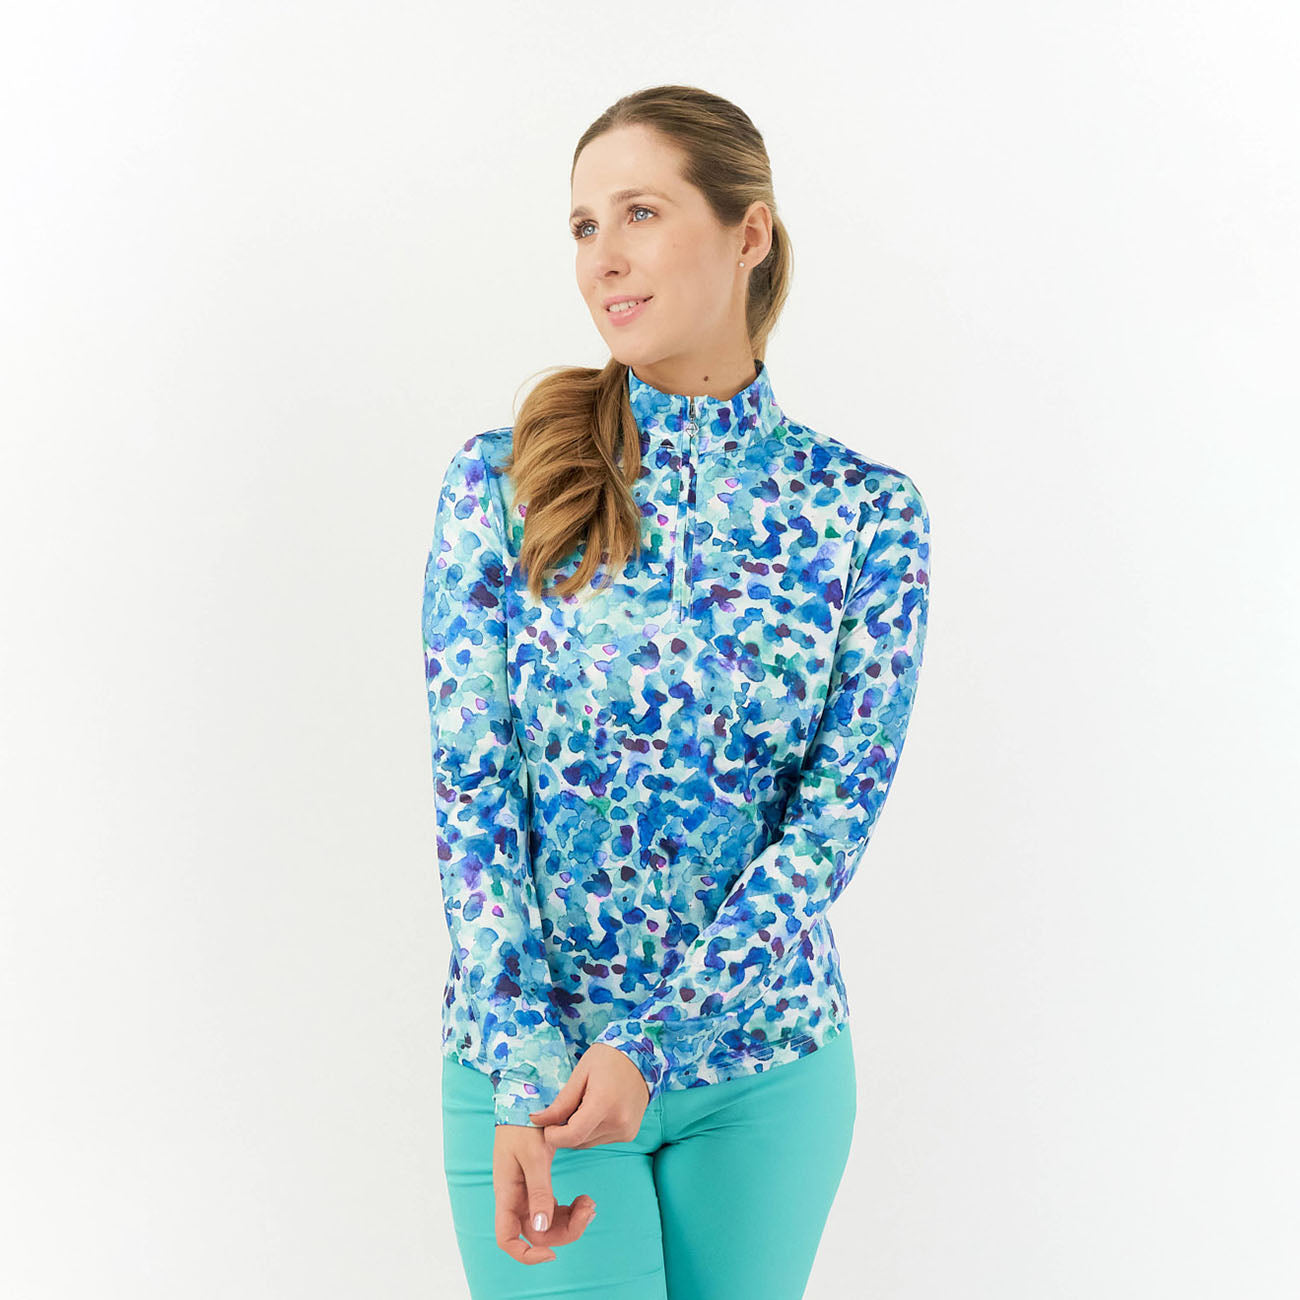 Pure Golf Ladies Long Sleeve Top in Dappled Ocean Print with Sun Protection